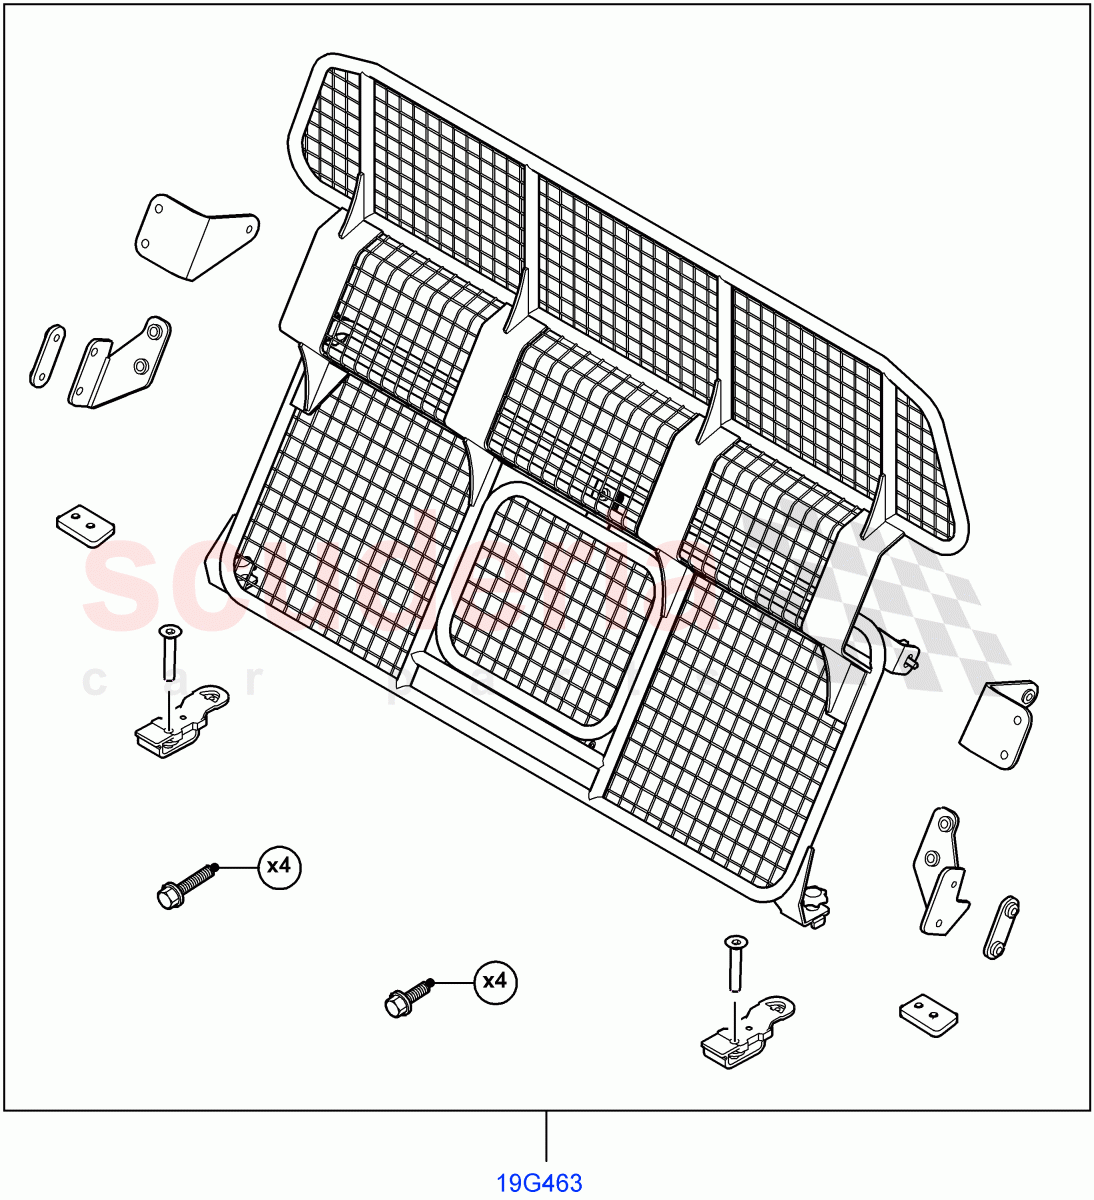 Cargo Barrier(Accessory)(For Unleaded Fuel,With Diesel Fuel Capability,Diesel/Electric - Hybrid) of Land Rover Land Rover Range Rover (2012-2021) [3.0 DOHC GDI SC V6 Petrol]